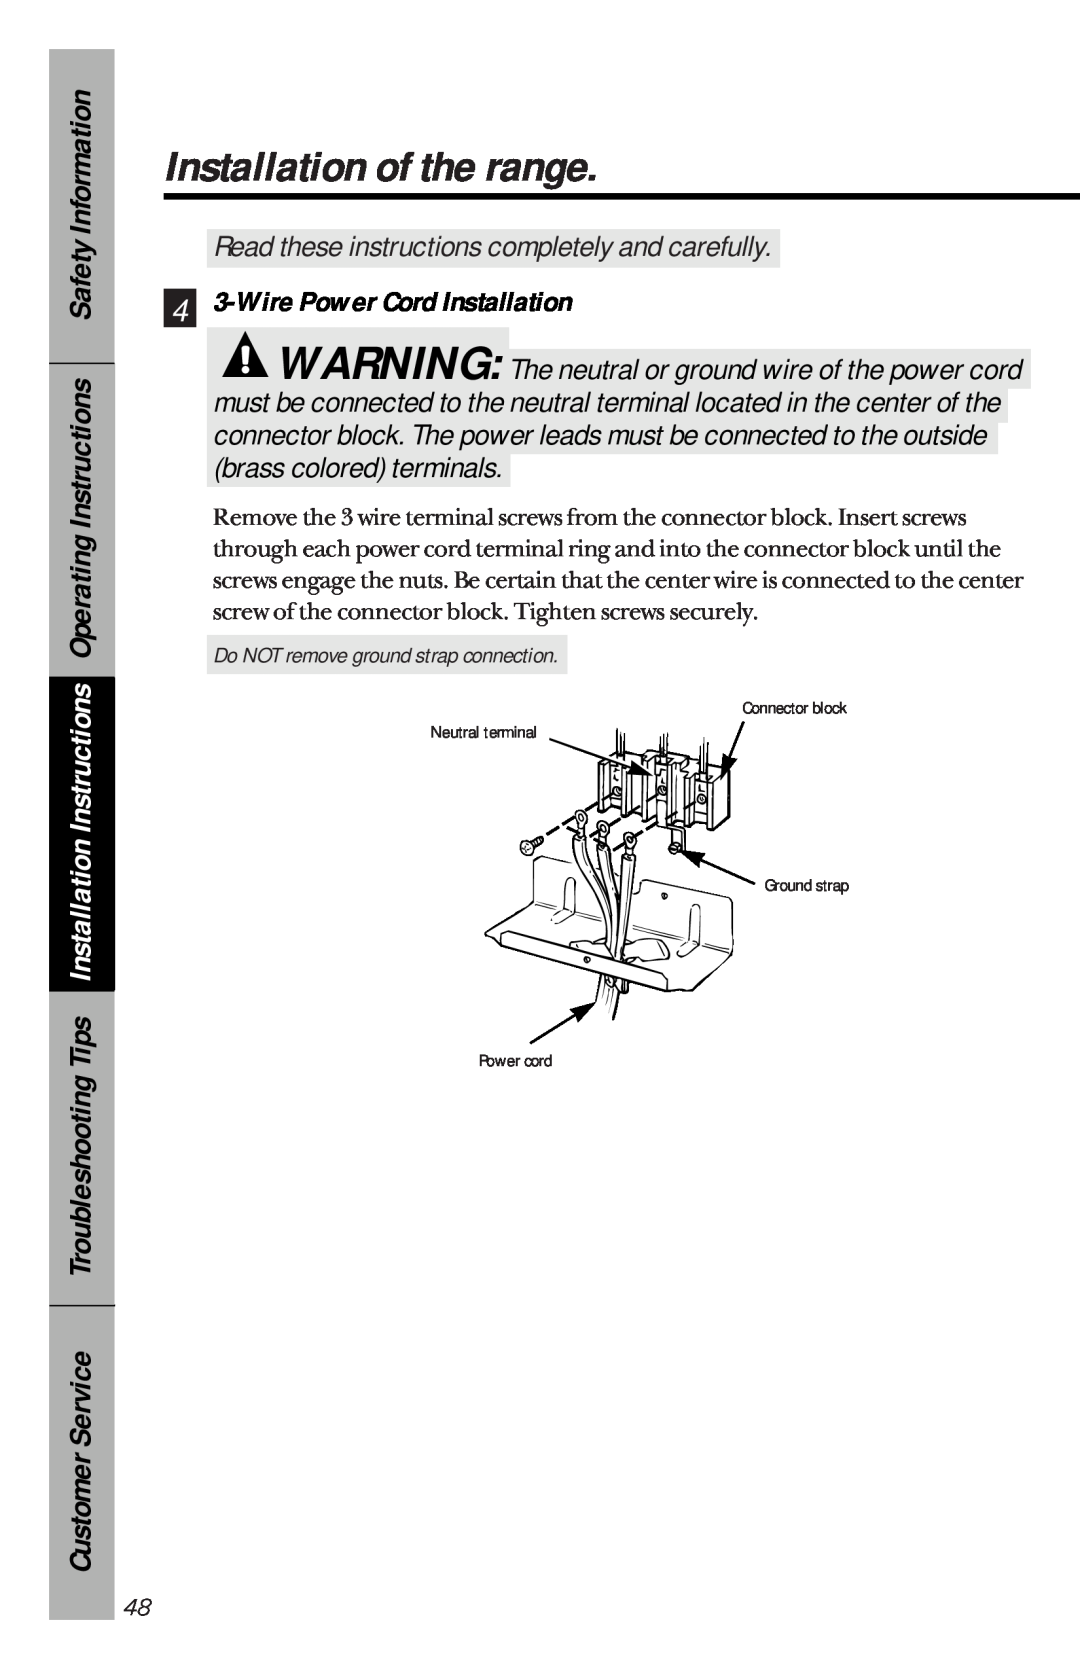 GE 49-8779 4 3-Wire Power Cord Installation, Installation of the range, Read these instructions completely and carefully 